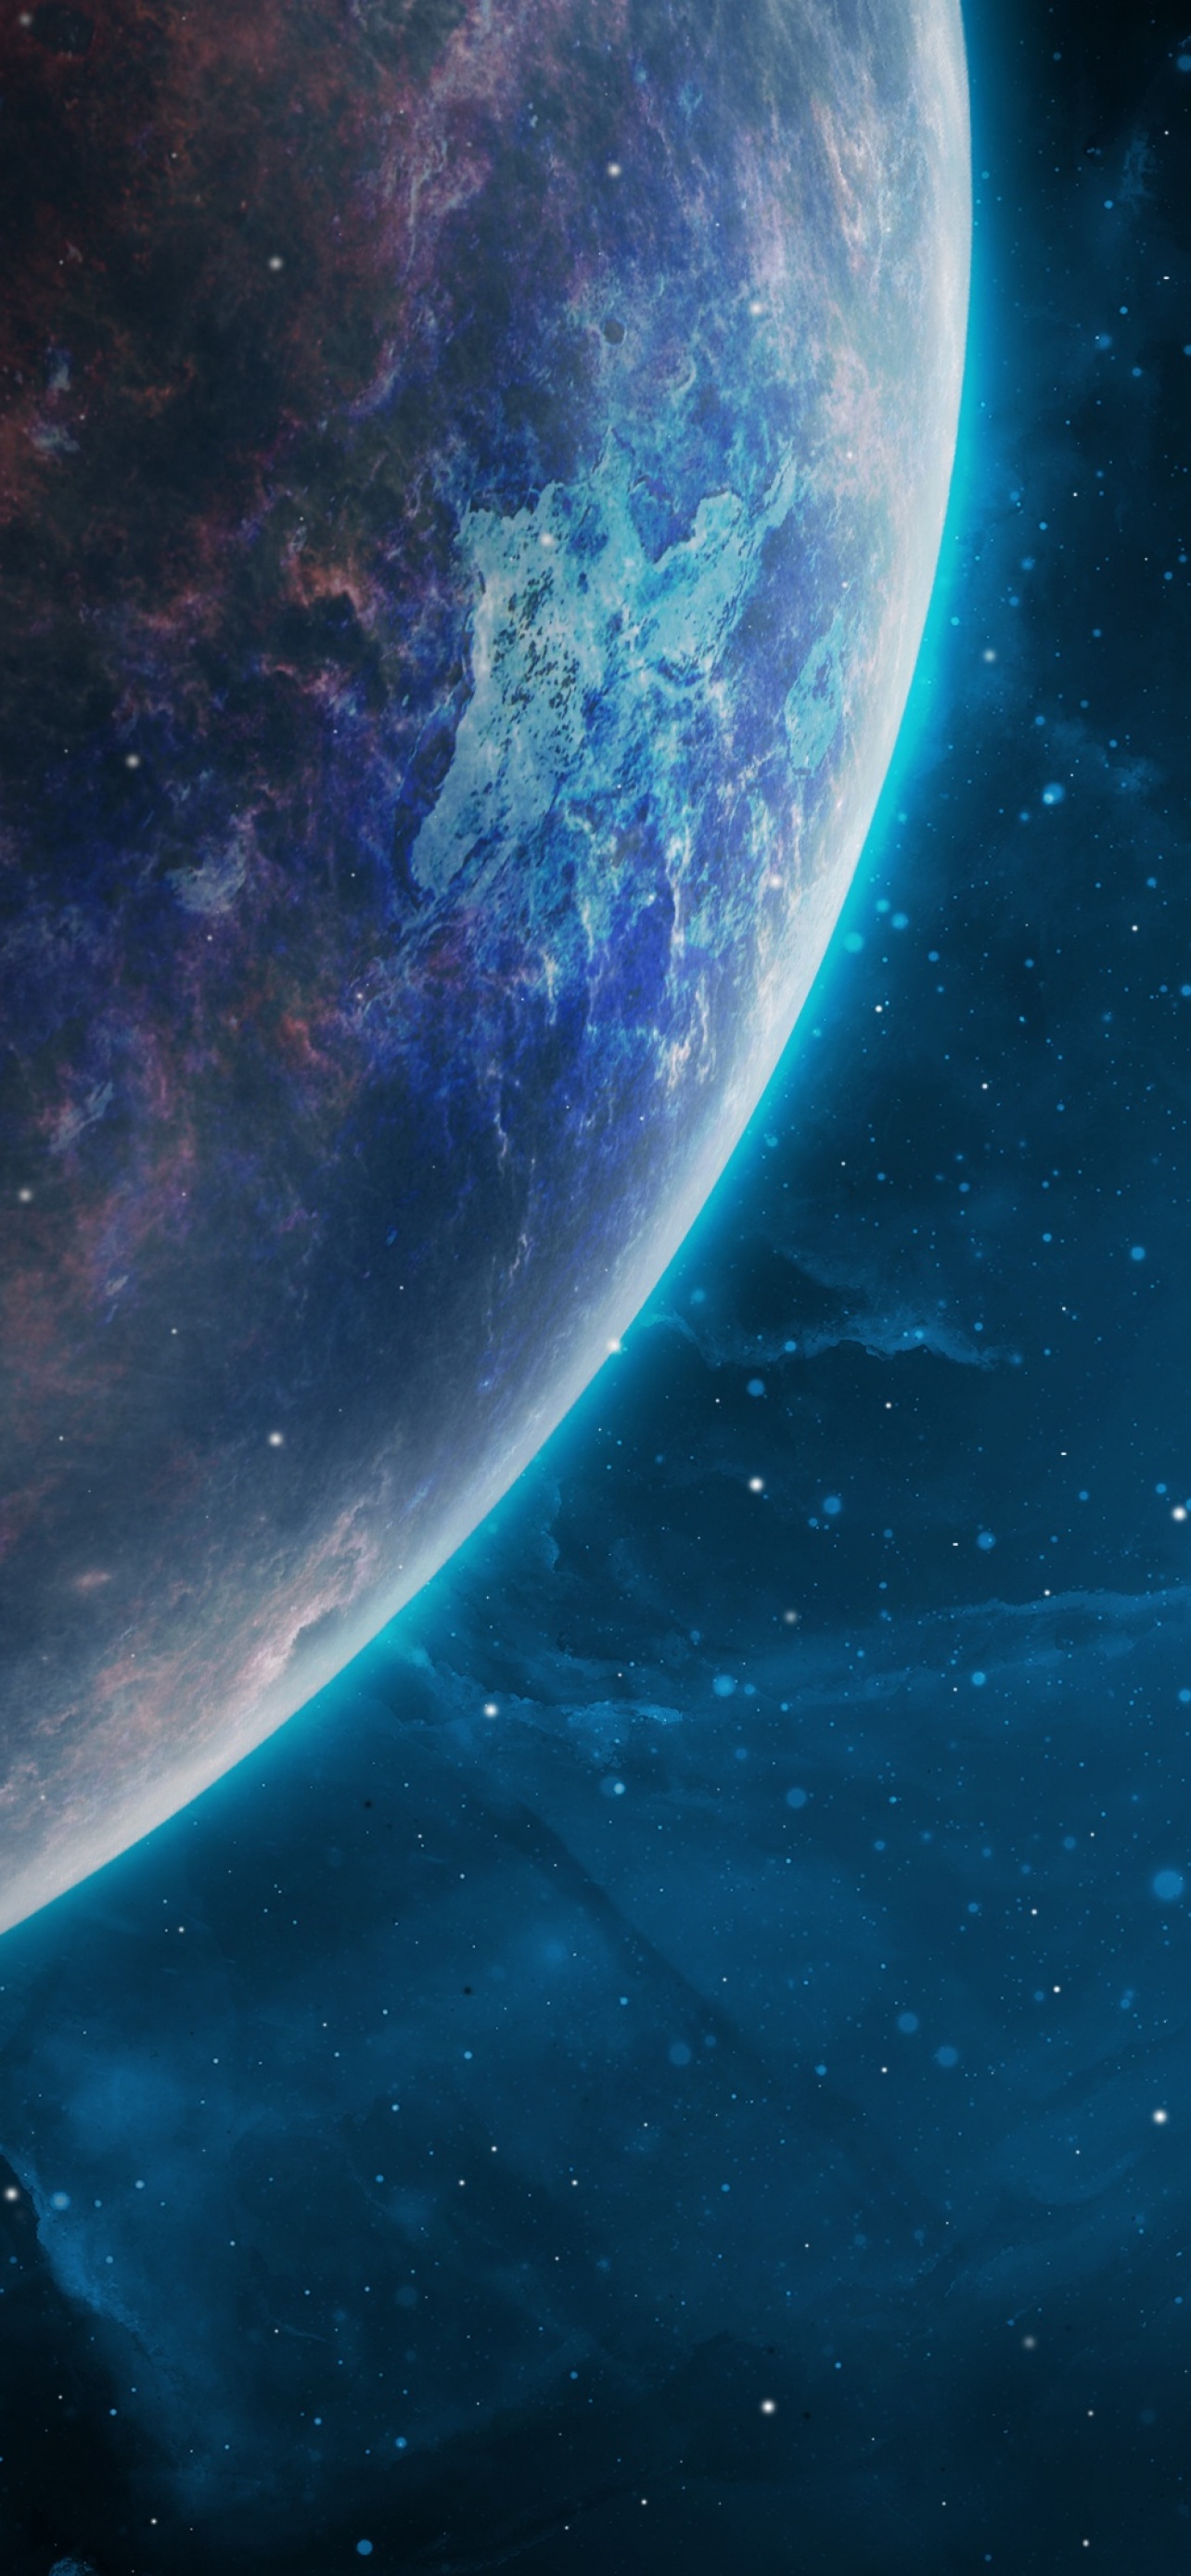 Download wallpaper 840x1336 planet, destruction, space, iphone 5, iphone  5s, iphone 5c, ipod touch, 840x1336 hd background, 1241